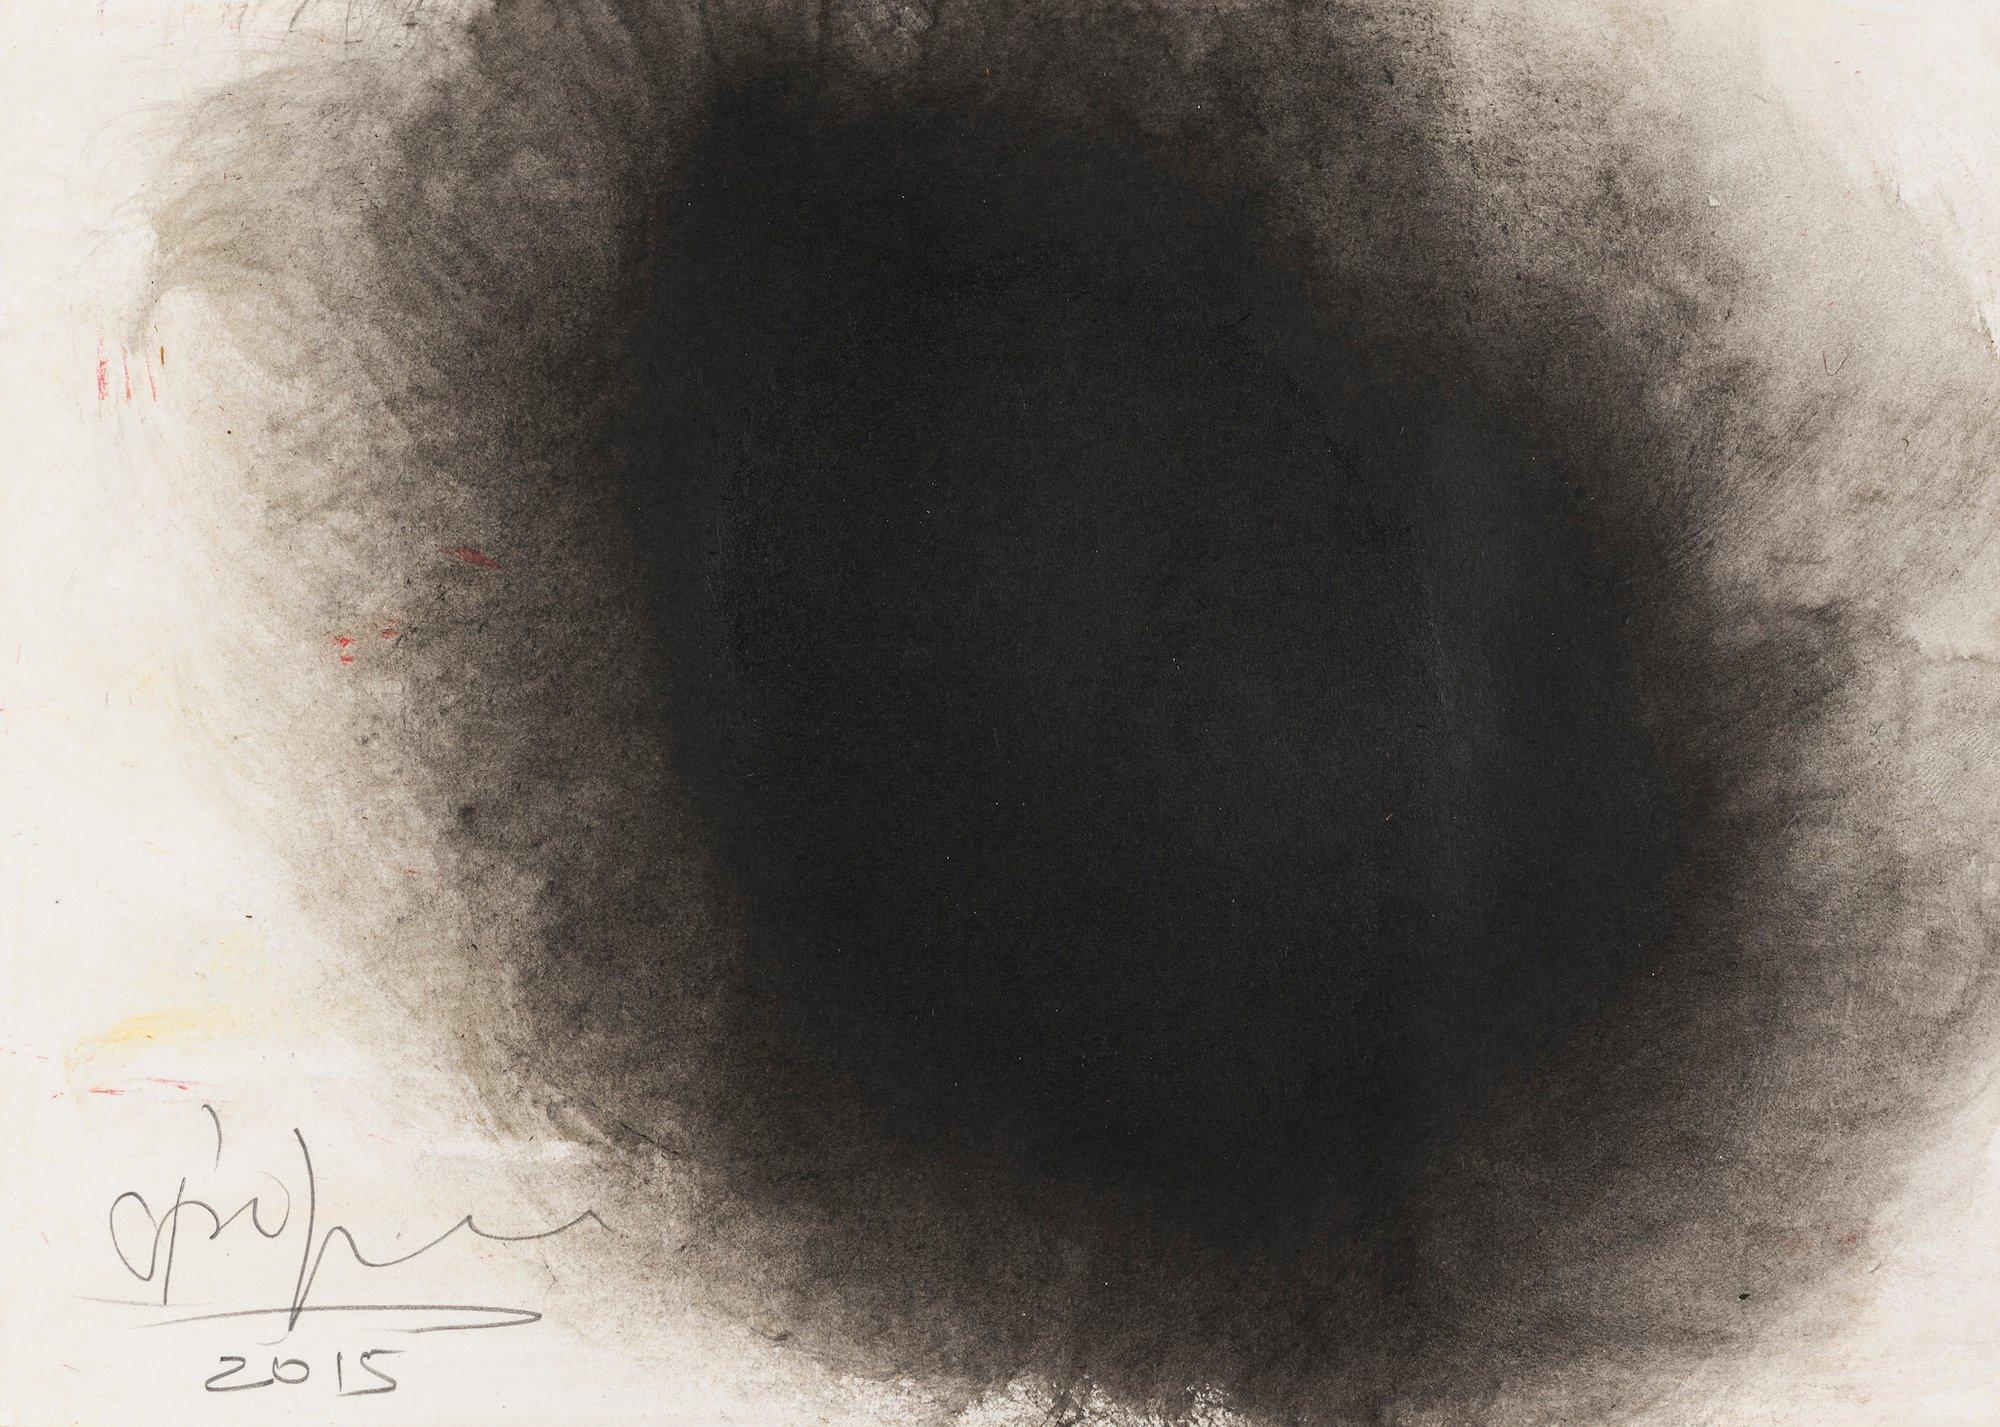 ANISH KAPOOR
Untitled, 2015
Ink and gouache on paper 
Signed and dated in pencil
Sheet: 21.0 x 29.5 cm (8.3 x 11.6 in)

Provenance
Private Collection, UK.
The Drawing Room, London, UK.